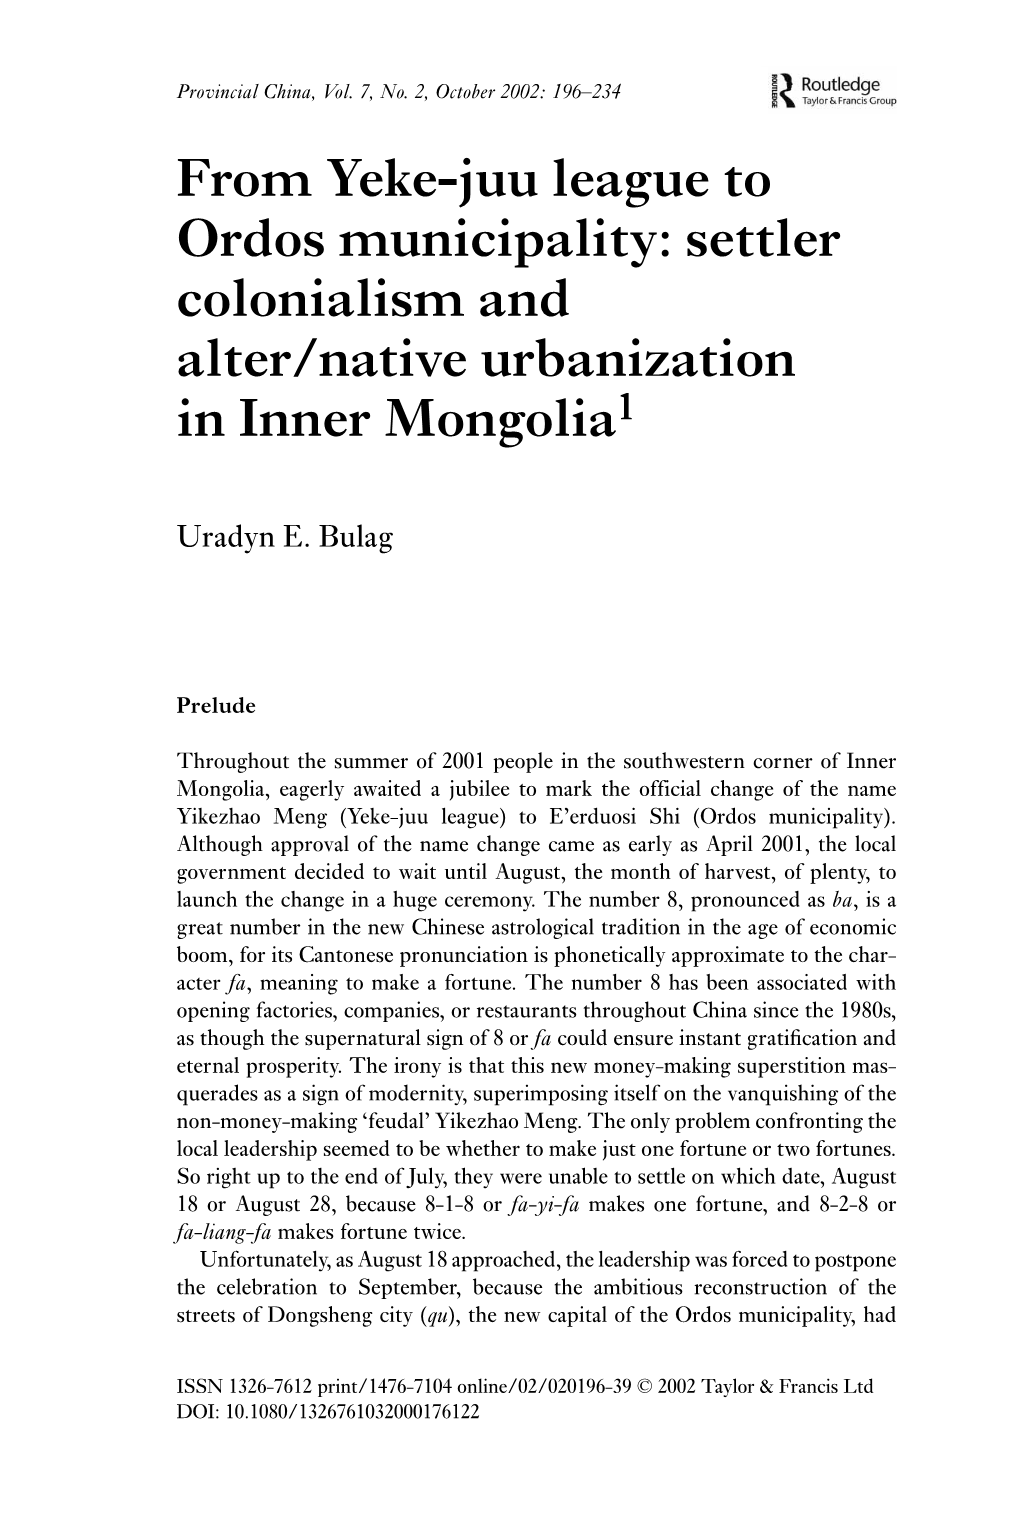 From Yeke-Juu League to Ordos Municipality: Settler Colonialism and Alter/Native Urbanization in Inner Mongolia1